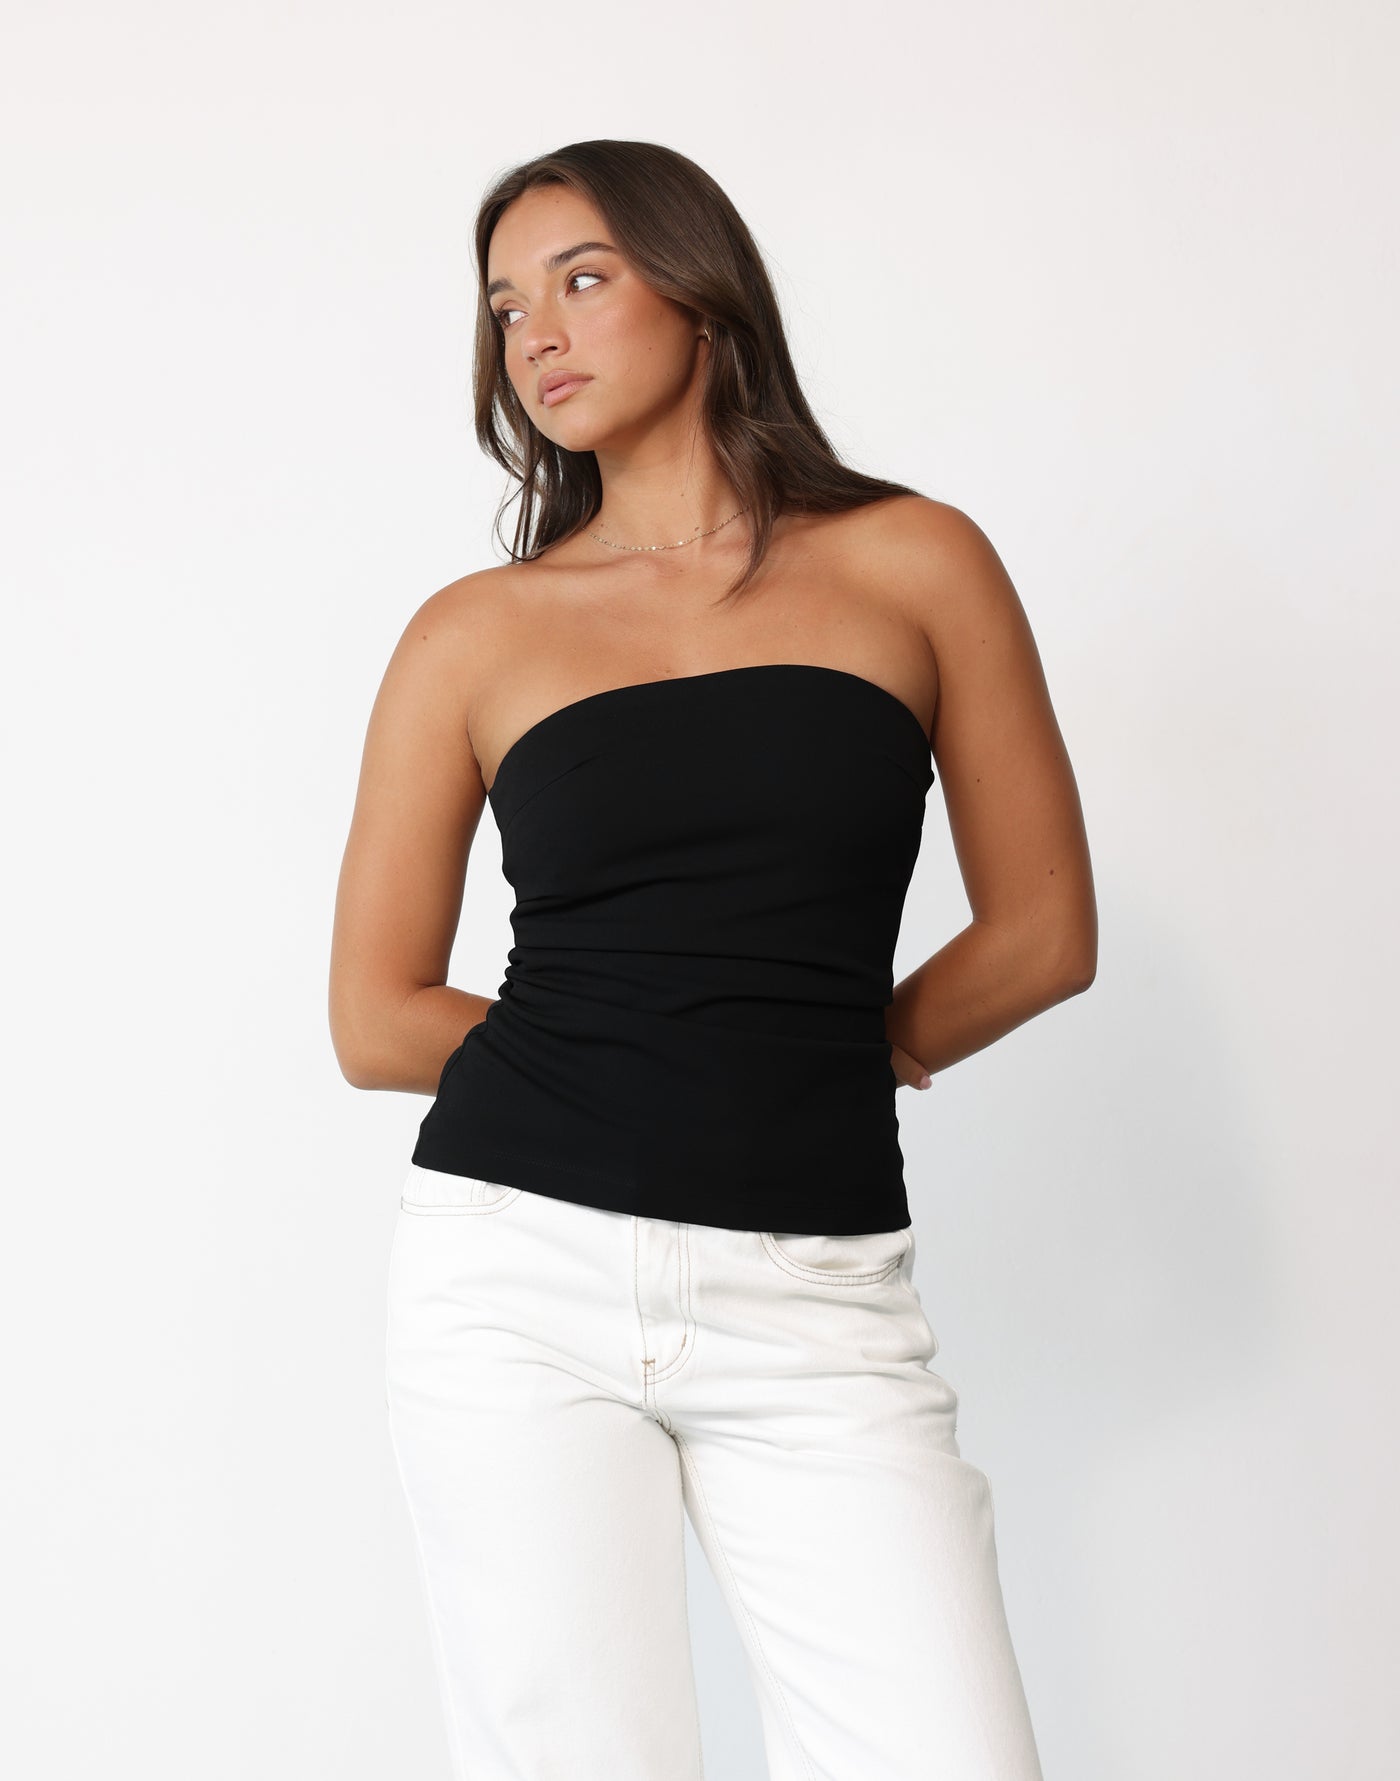 Reverie Top (Black) - Strapless Tube Style Longline Top - Women's Top - Charcoal Clothing